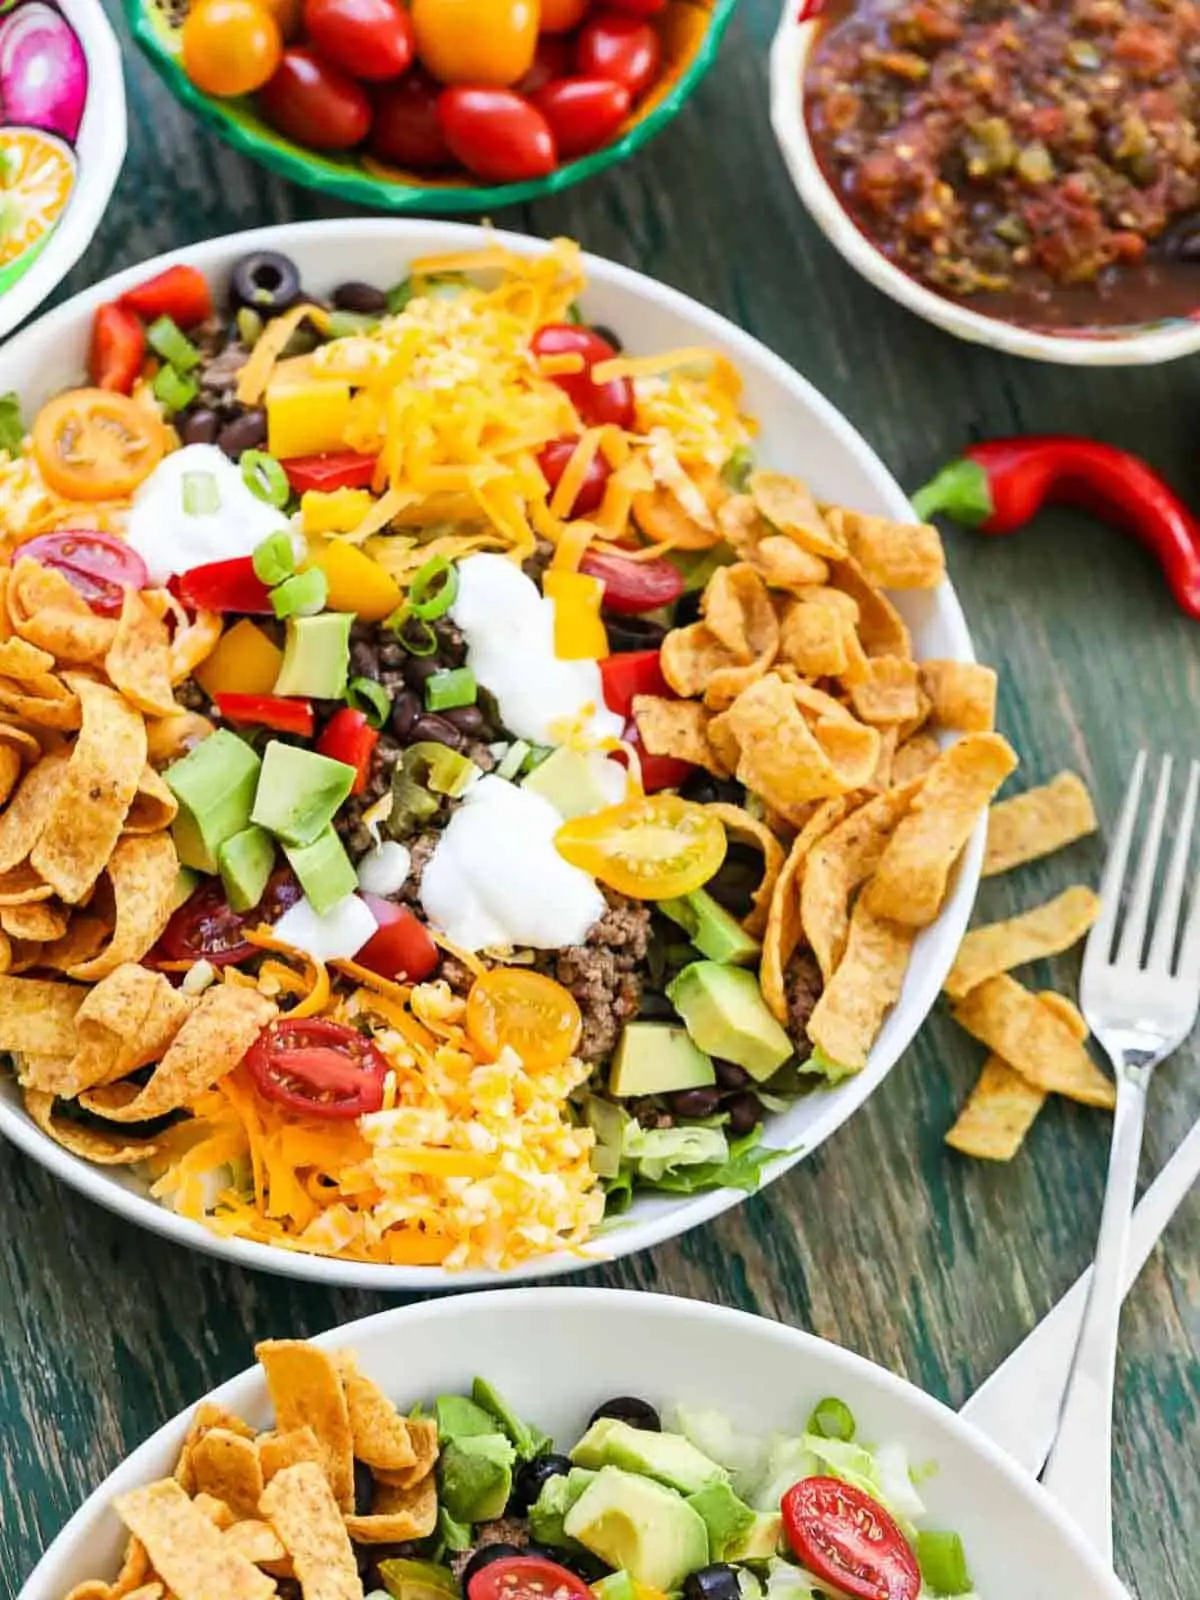 Fritos on top of taco salad with sour cream, avocado, tomatoes, and olives.